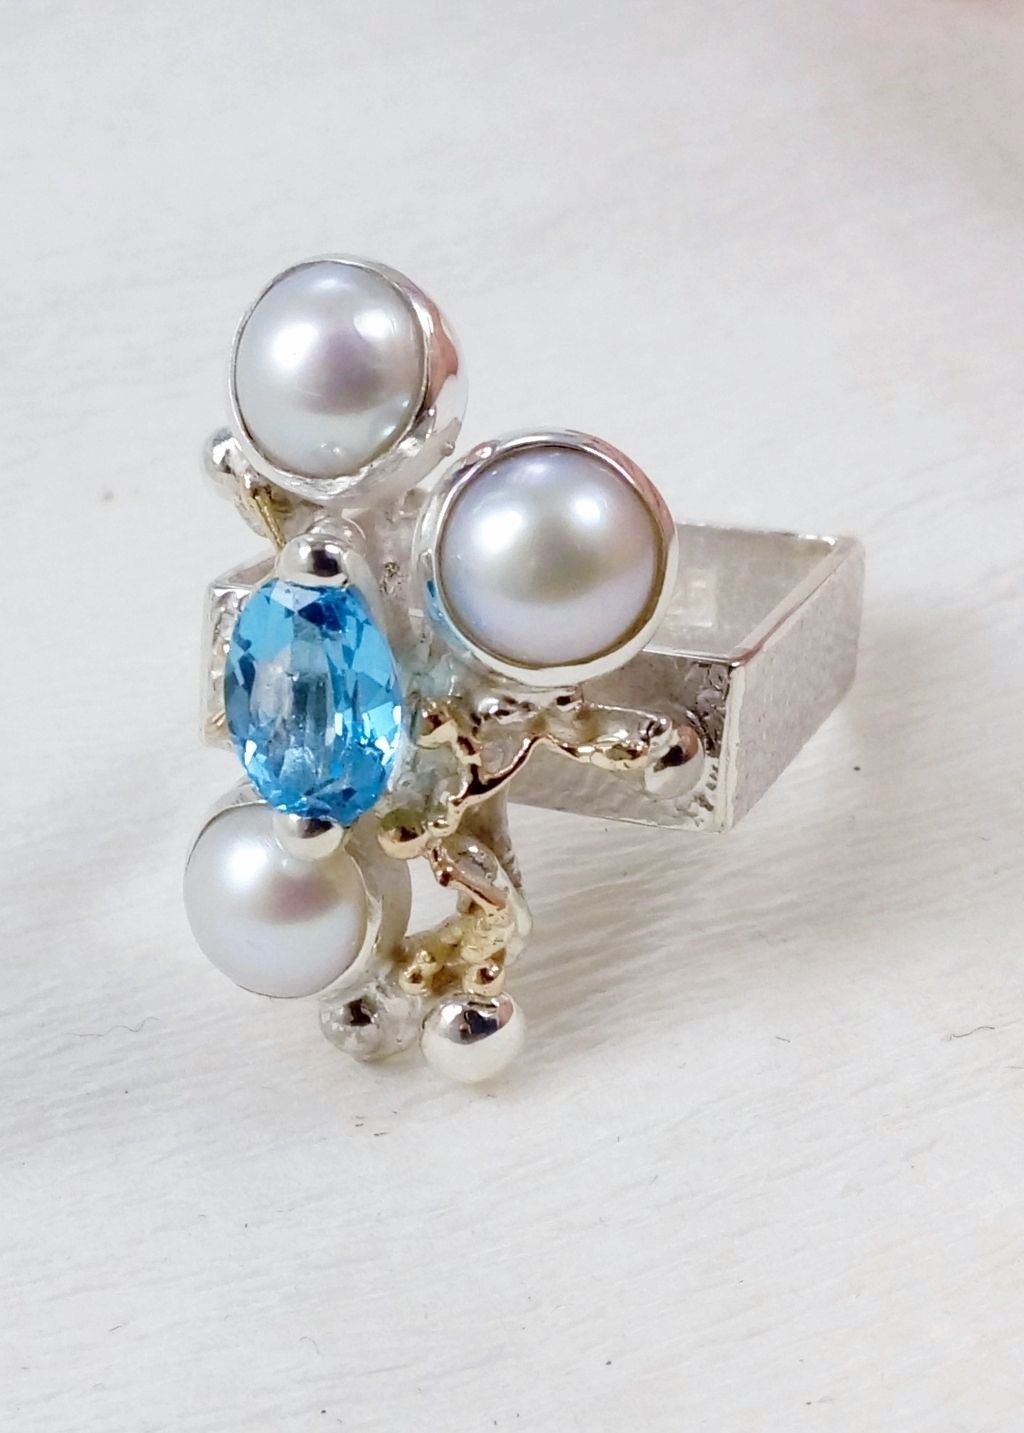 designer jewellery and handmade artisan jewellery at auctions and in galleries, Gregory Pyra Piro artian reticulated mixed metal square ring #8391, designer jewellery and fine jewellery at auctions, ring in sterling silver, ring in 14 karat gold, ring with blue topaz, ring with pearls